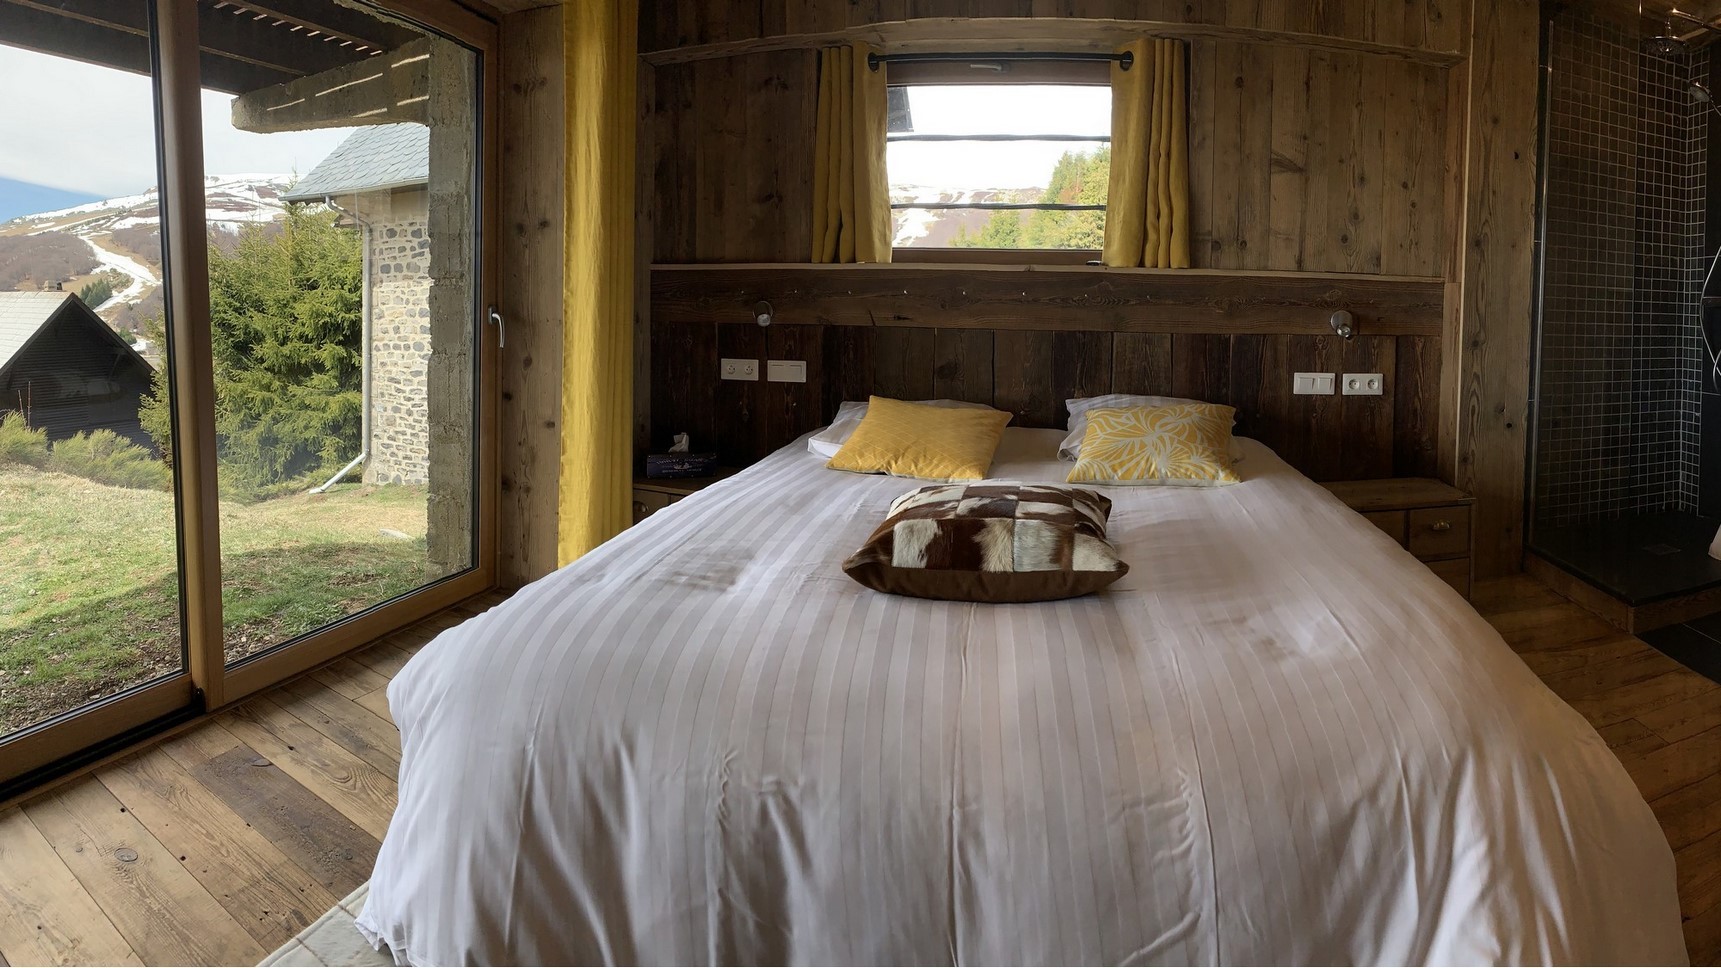 Super Besse chalet, Anorak chalet, waterfall bedroom, king size bed and its view